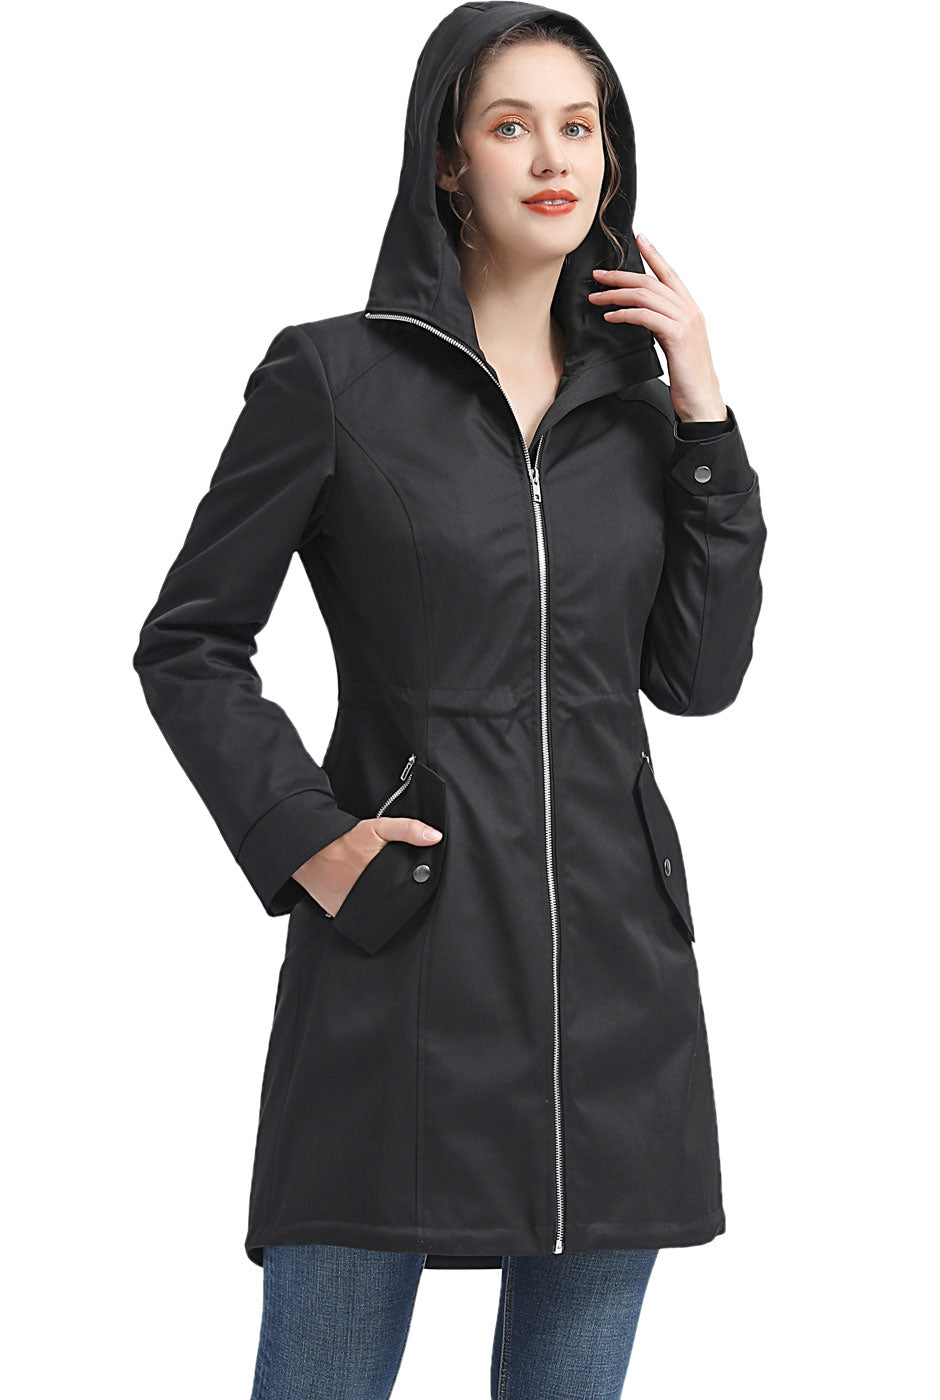 BGSD Women Zip-Out Lined Hooded Raincoat